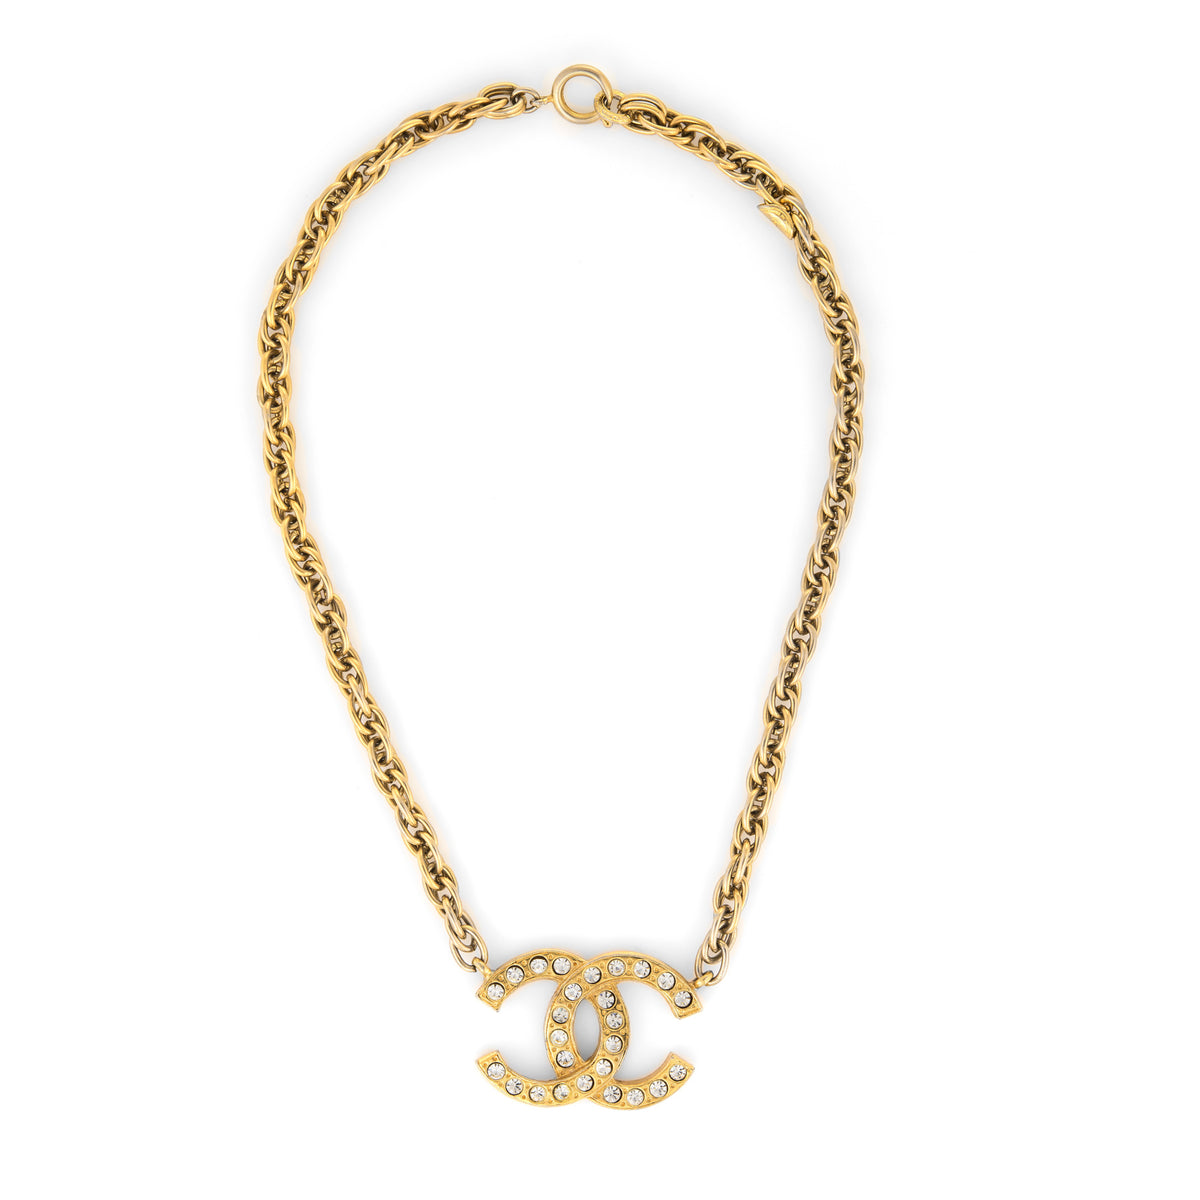 Chanel double sided CC pendant Necklace - BOPF